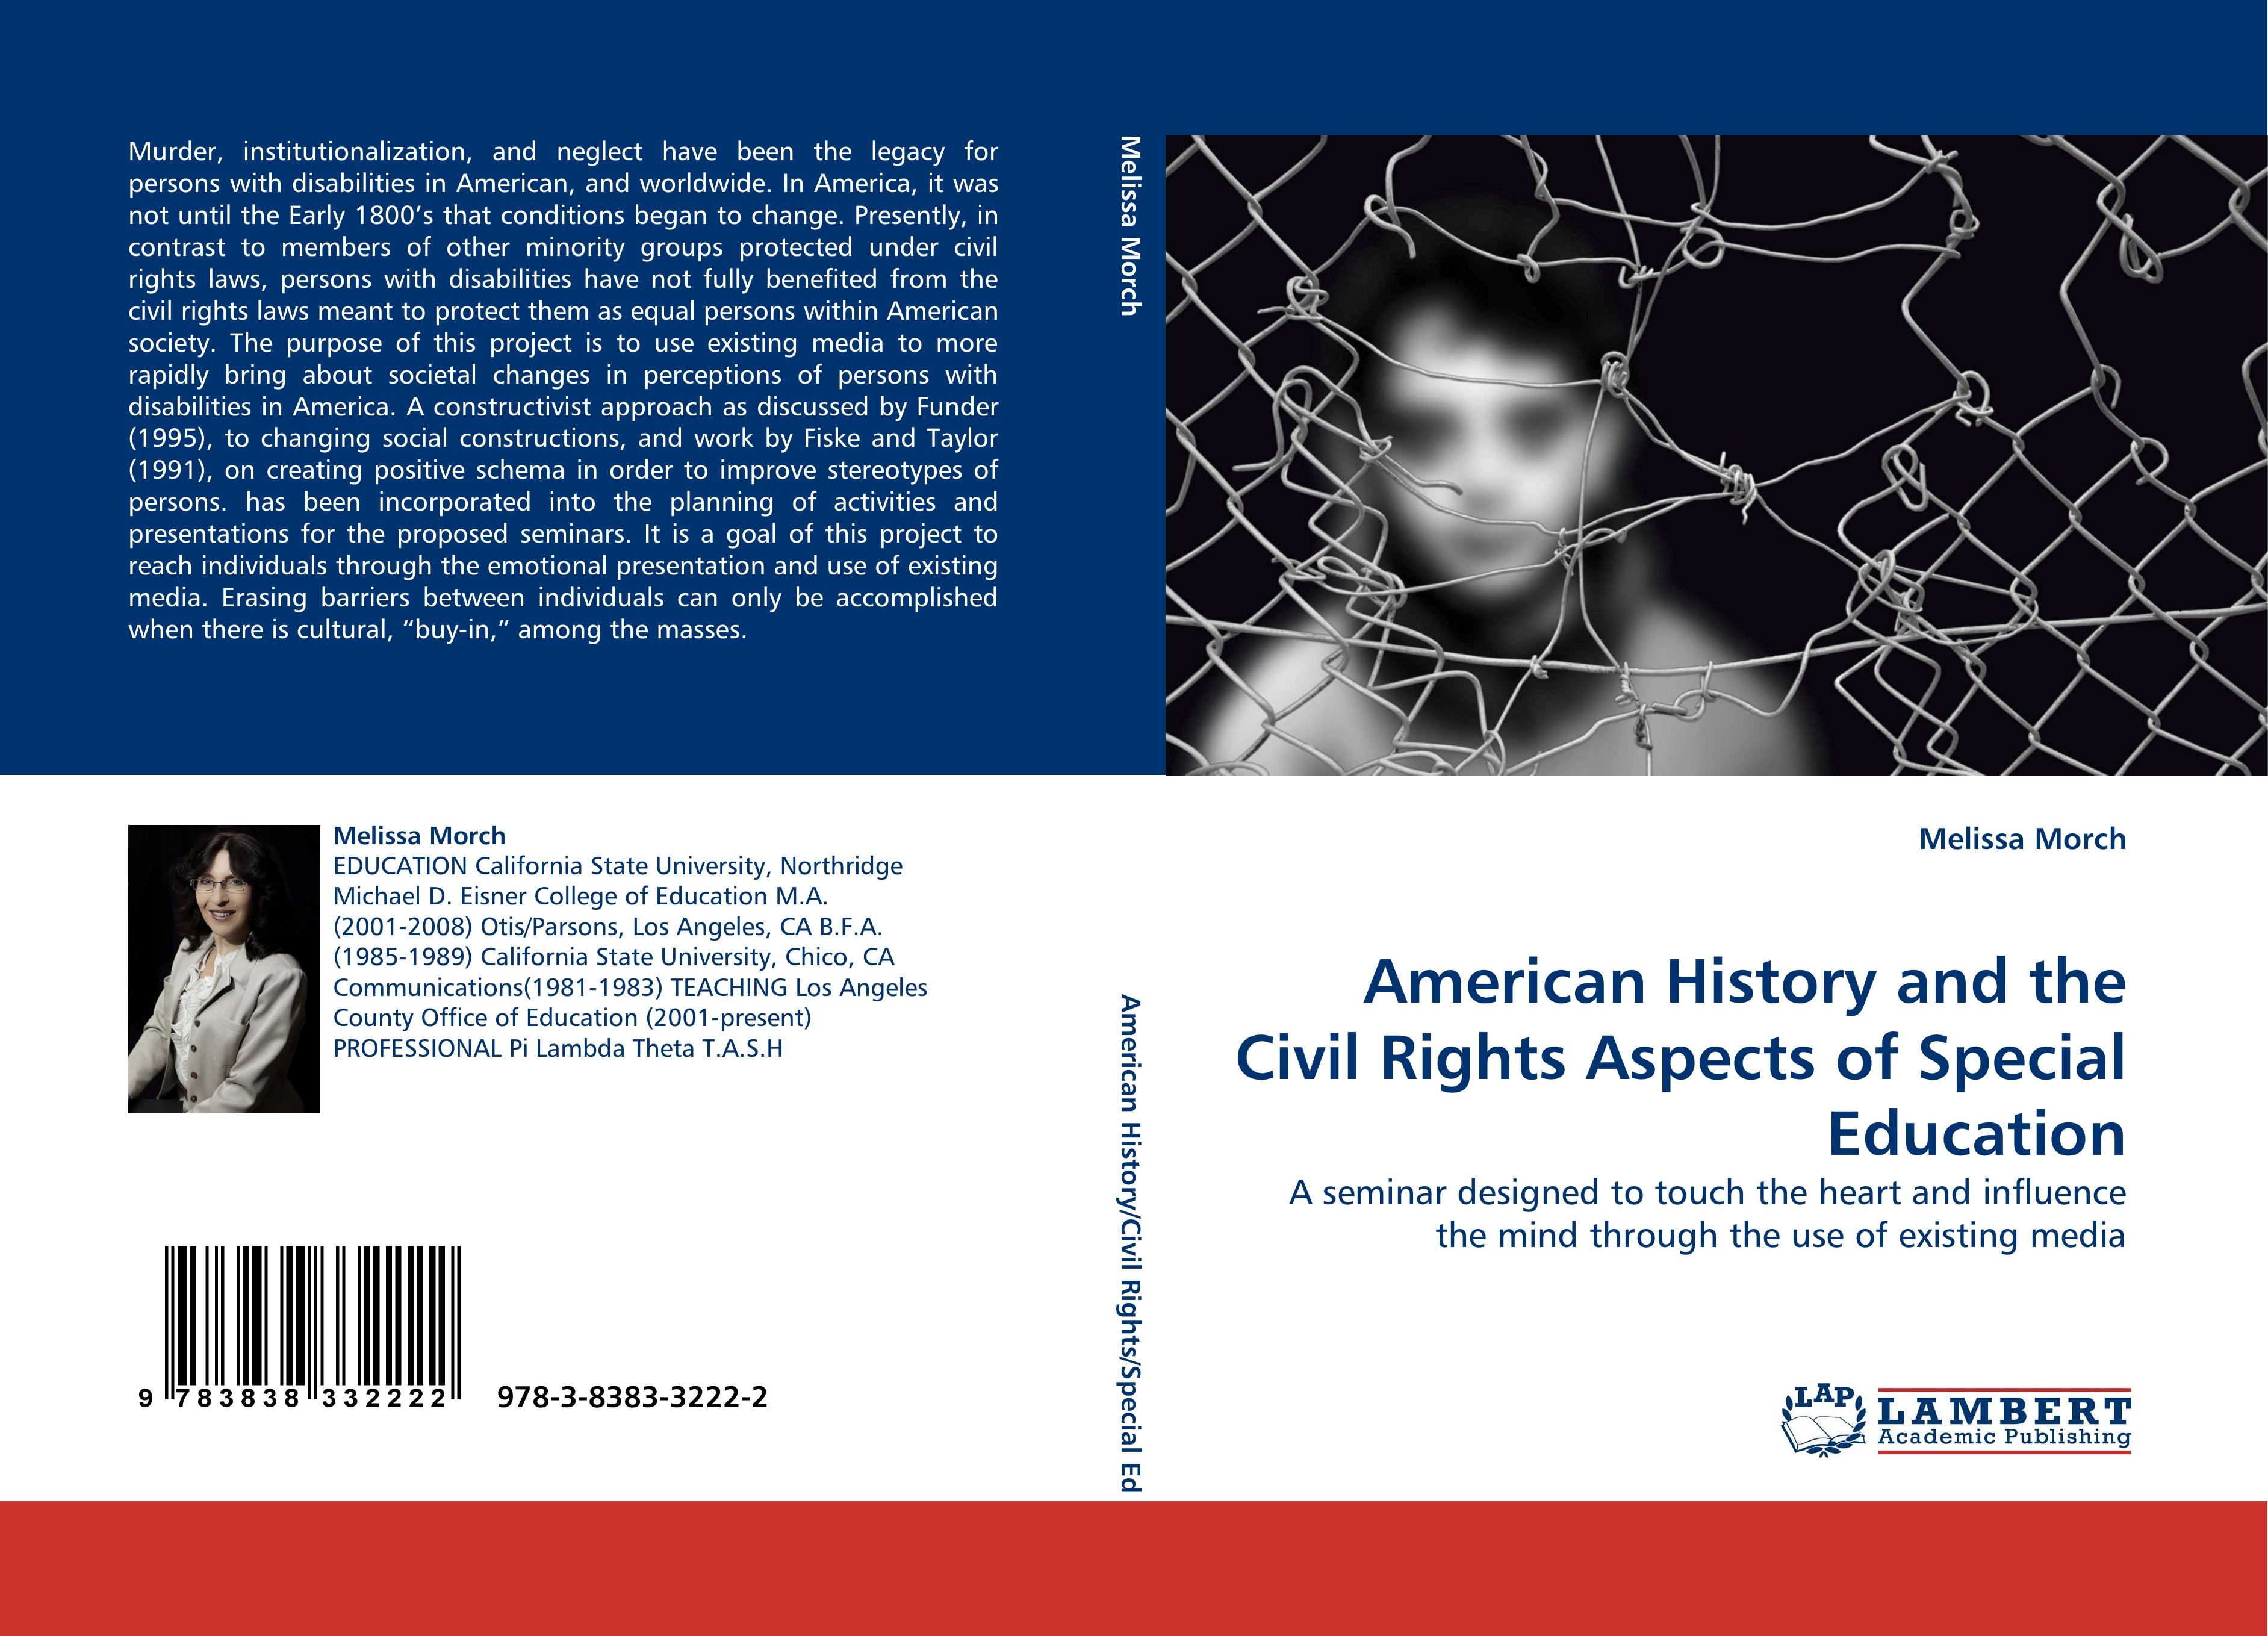 American History and the Civil Rights Aspects of Special Education - Melissa Morch